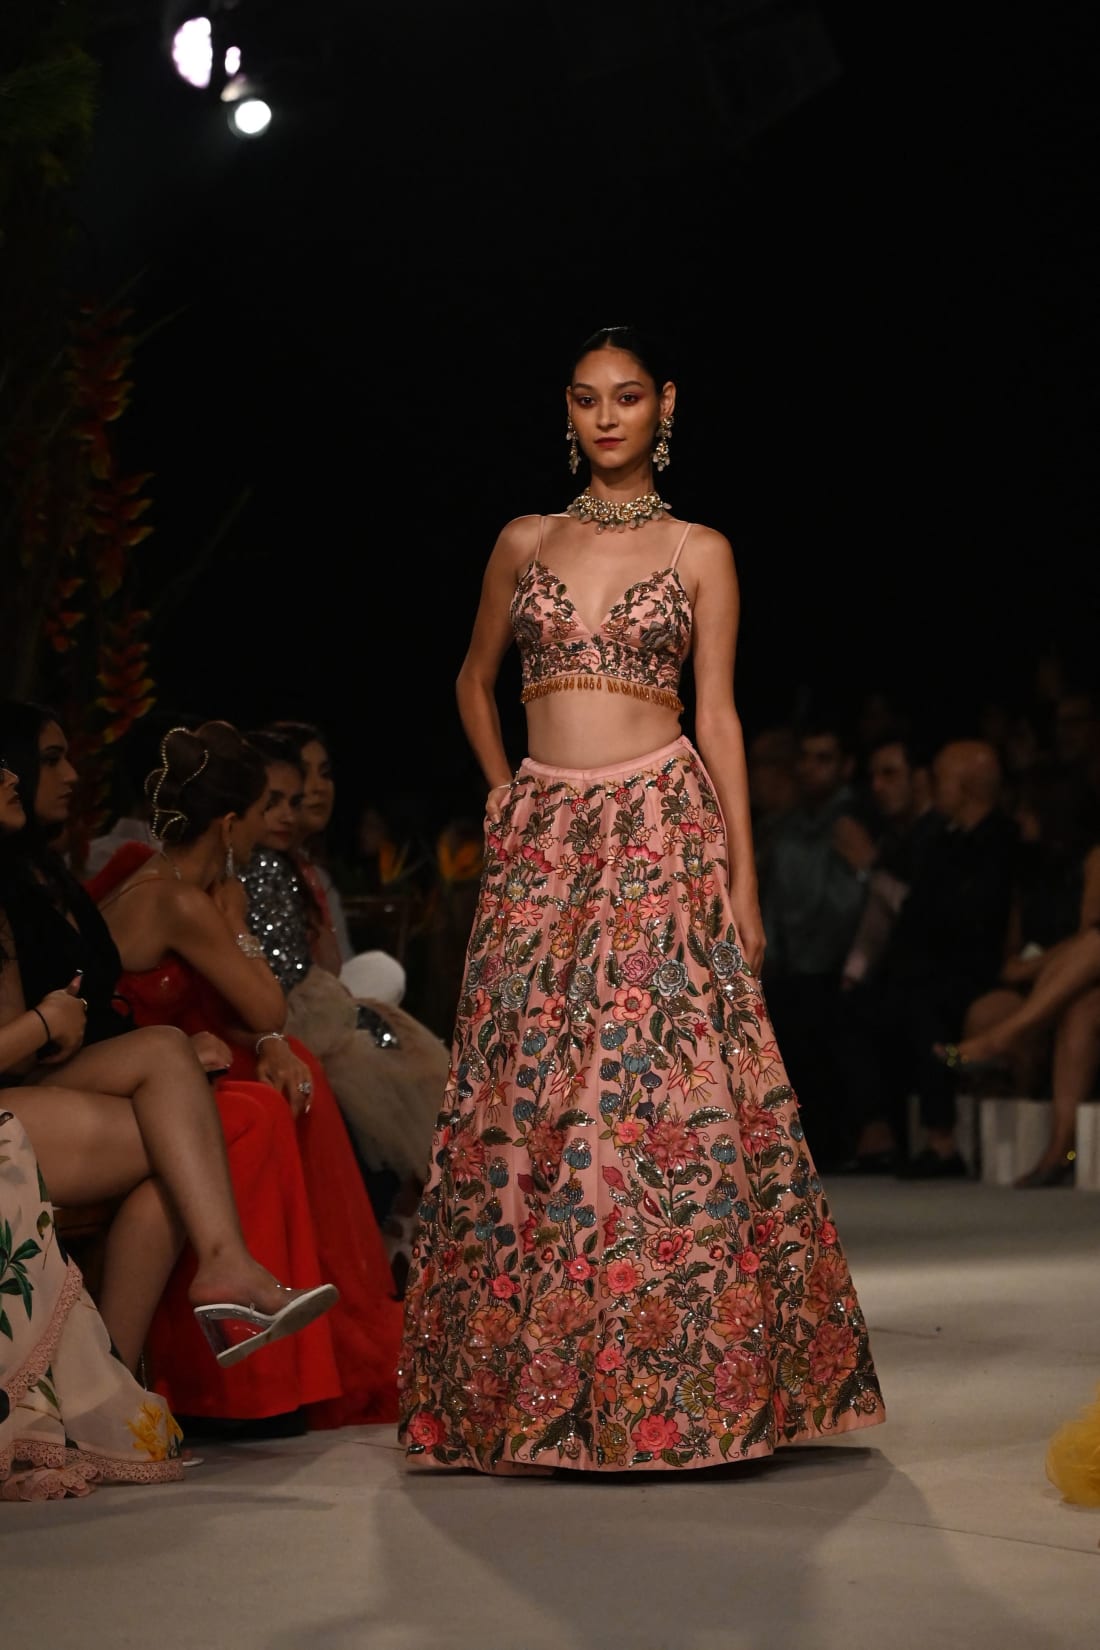 A model presents a creation by designer Varun Bahl during the FDCI India Couture Week in New Delhi on July 26, 2022.